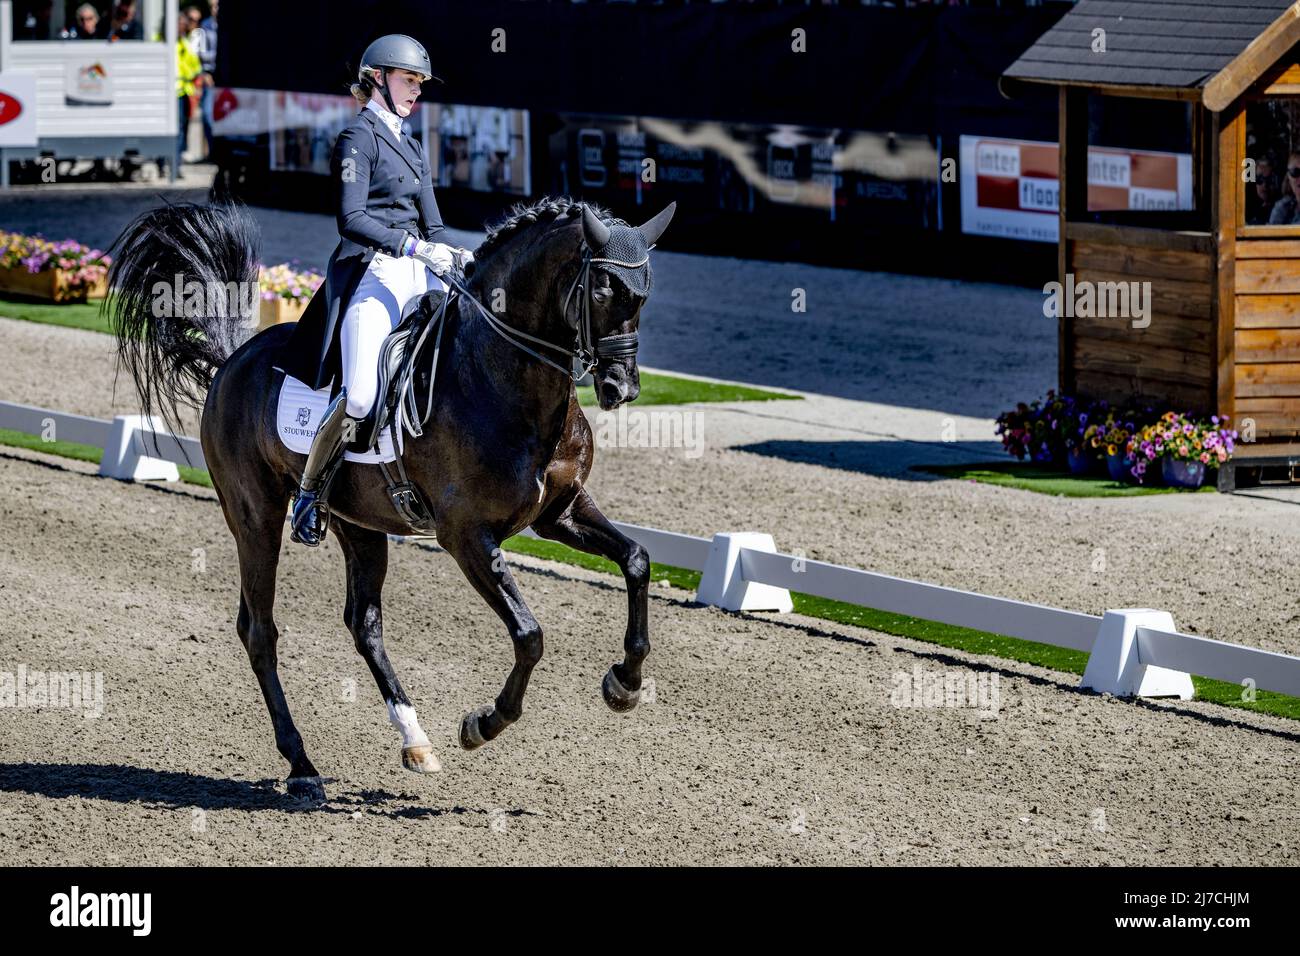 Ermelo, The Netherlands, 2022-05-08 15:23:00 ERMELO - Denise Nekeman on Boston STH in action during the Dutch Dressage Championship. ANP ROBIN UTRECHT netherlands out - belgium out Stock Photo